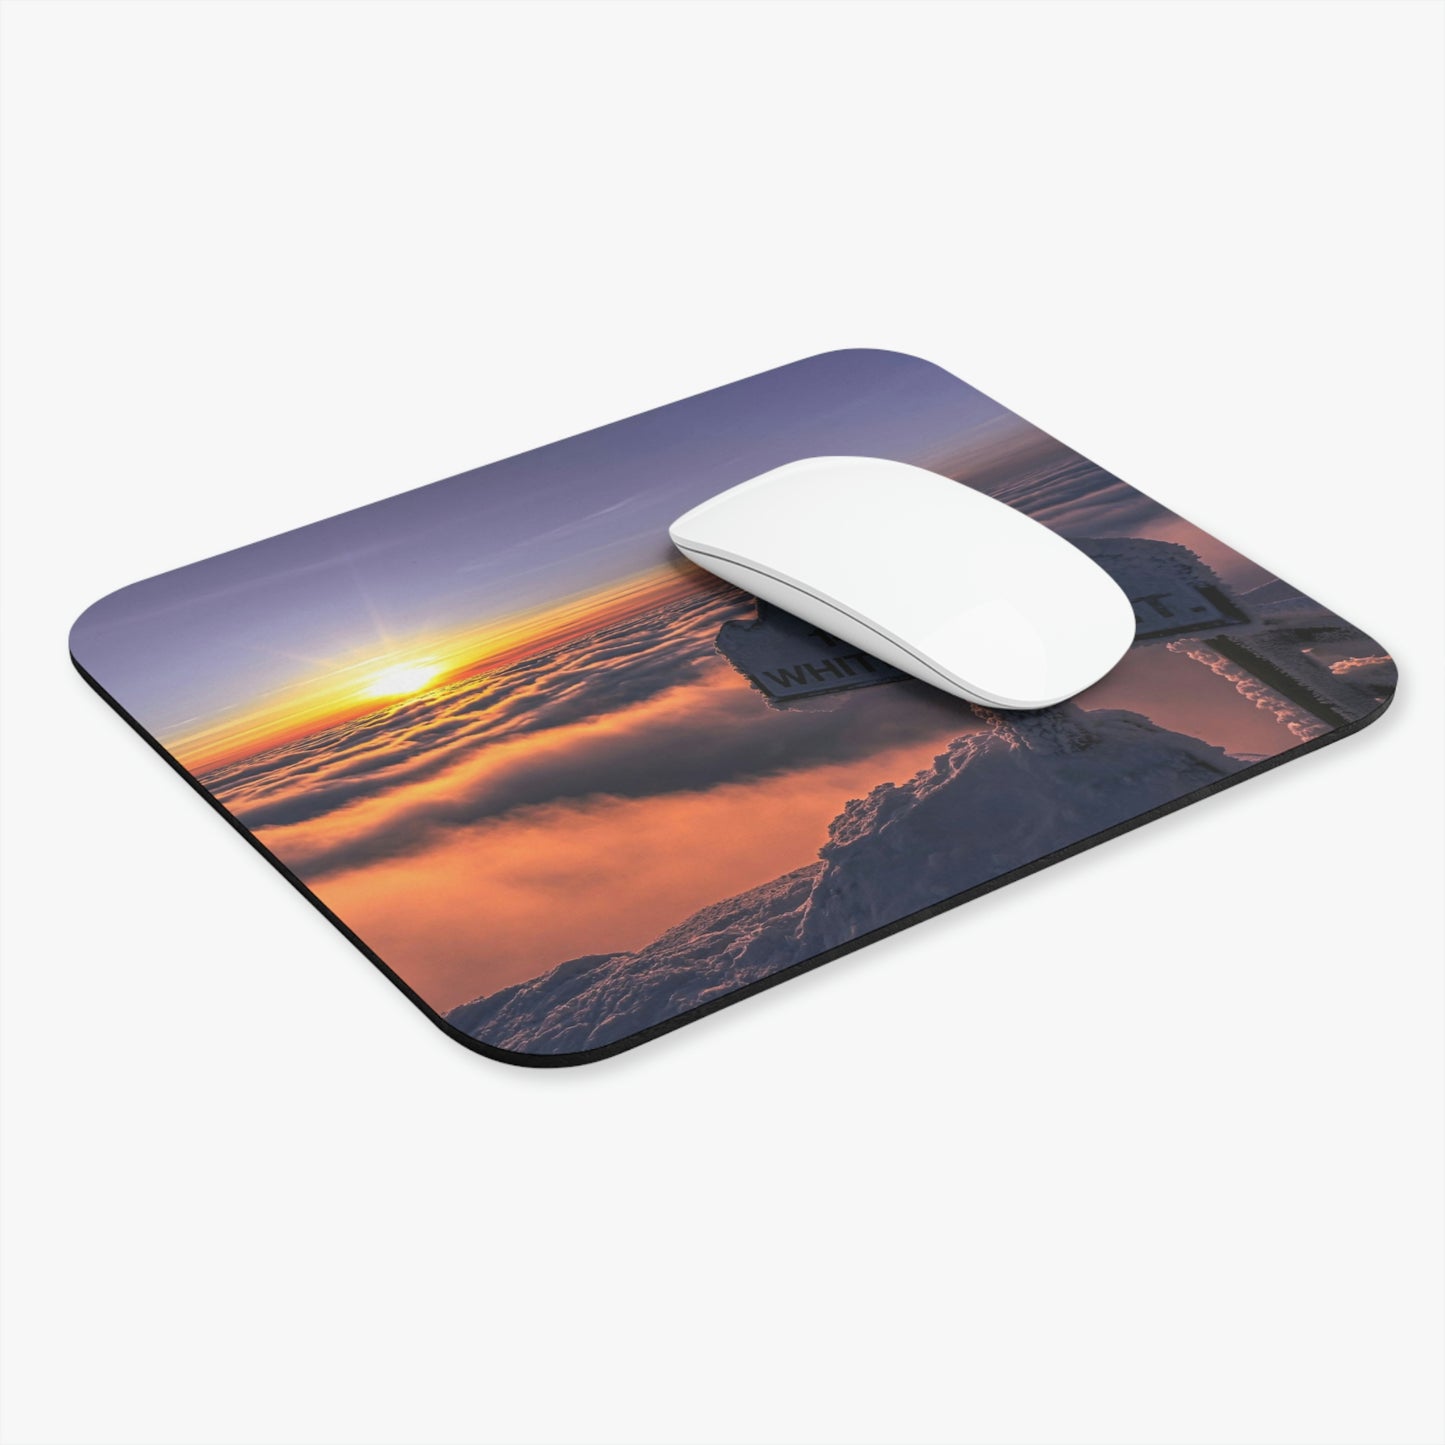 Above the Clouds Mouse Pad